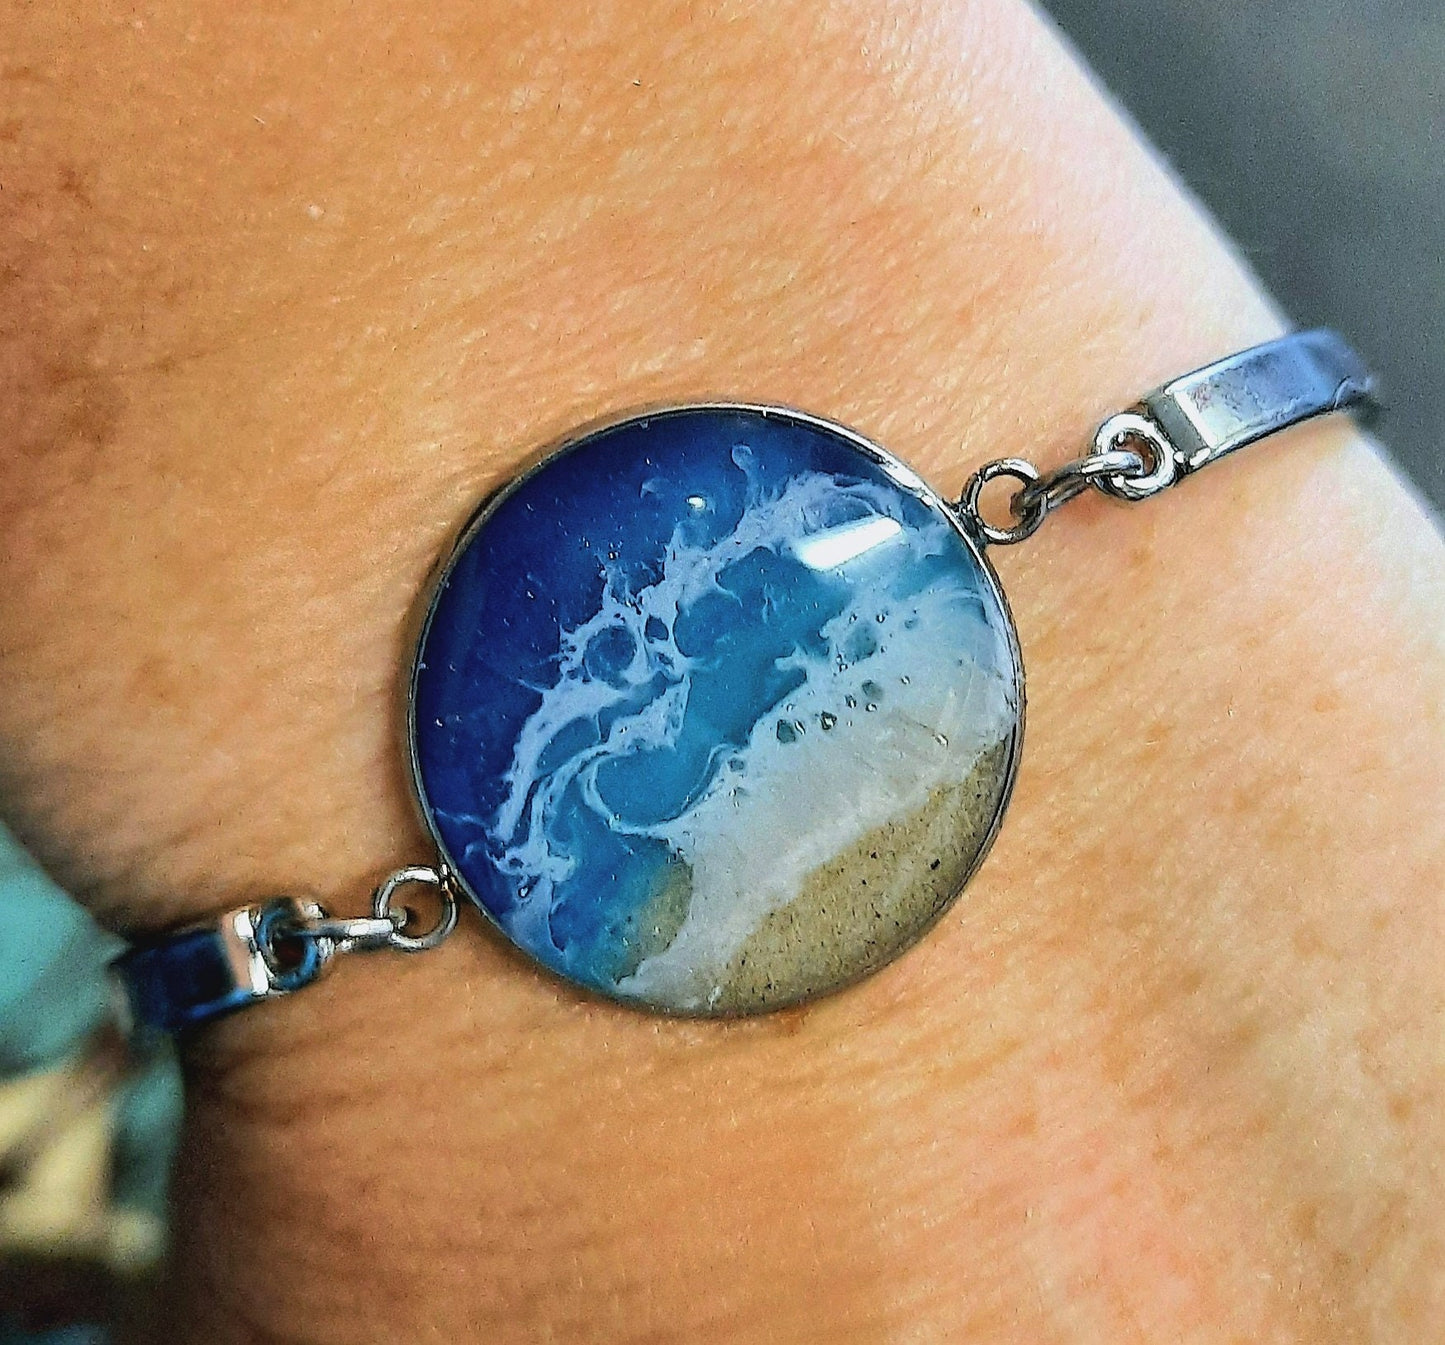 Resin Waves Ocean Bracelet / Beach Scene, Silver Stainless Steel, Adjustable Bracelet Made with Real Sand, Resin, & Mica - NOT A PHOTOGRAPH!